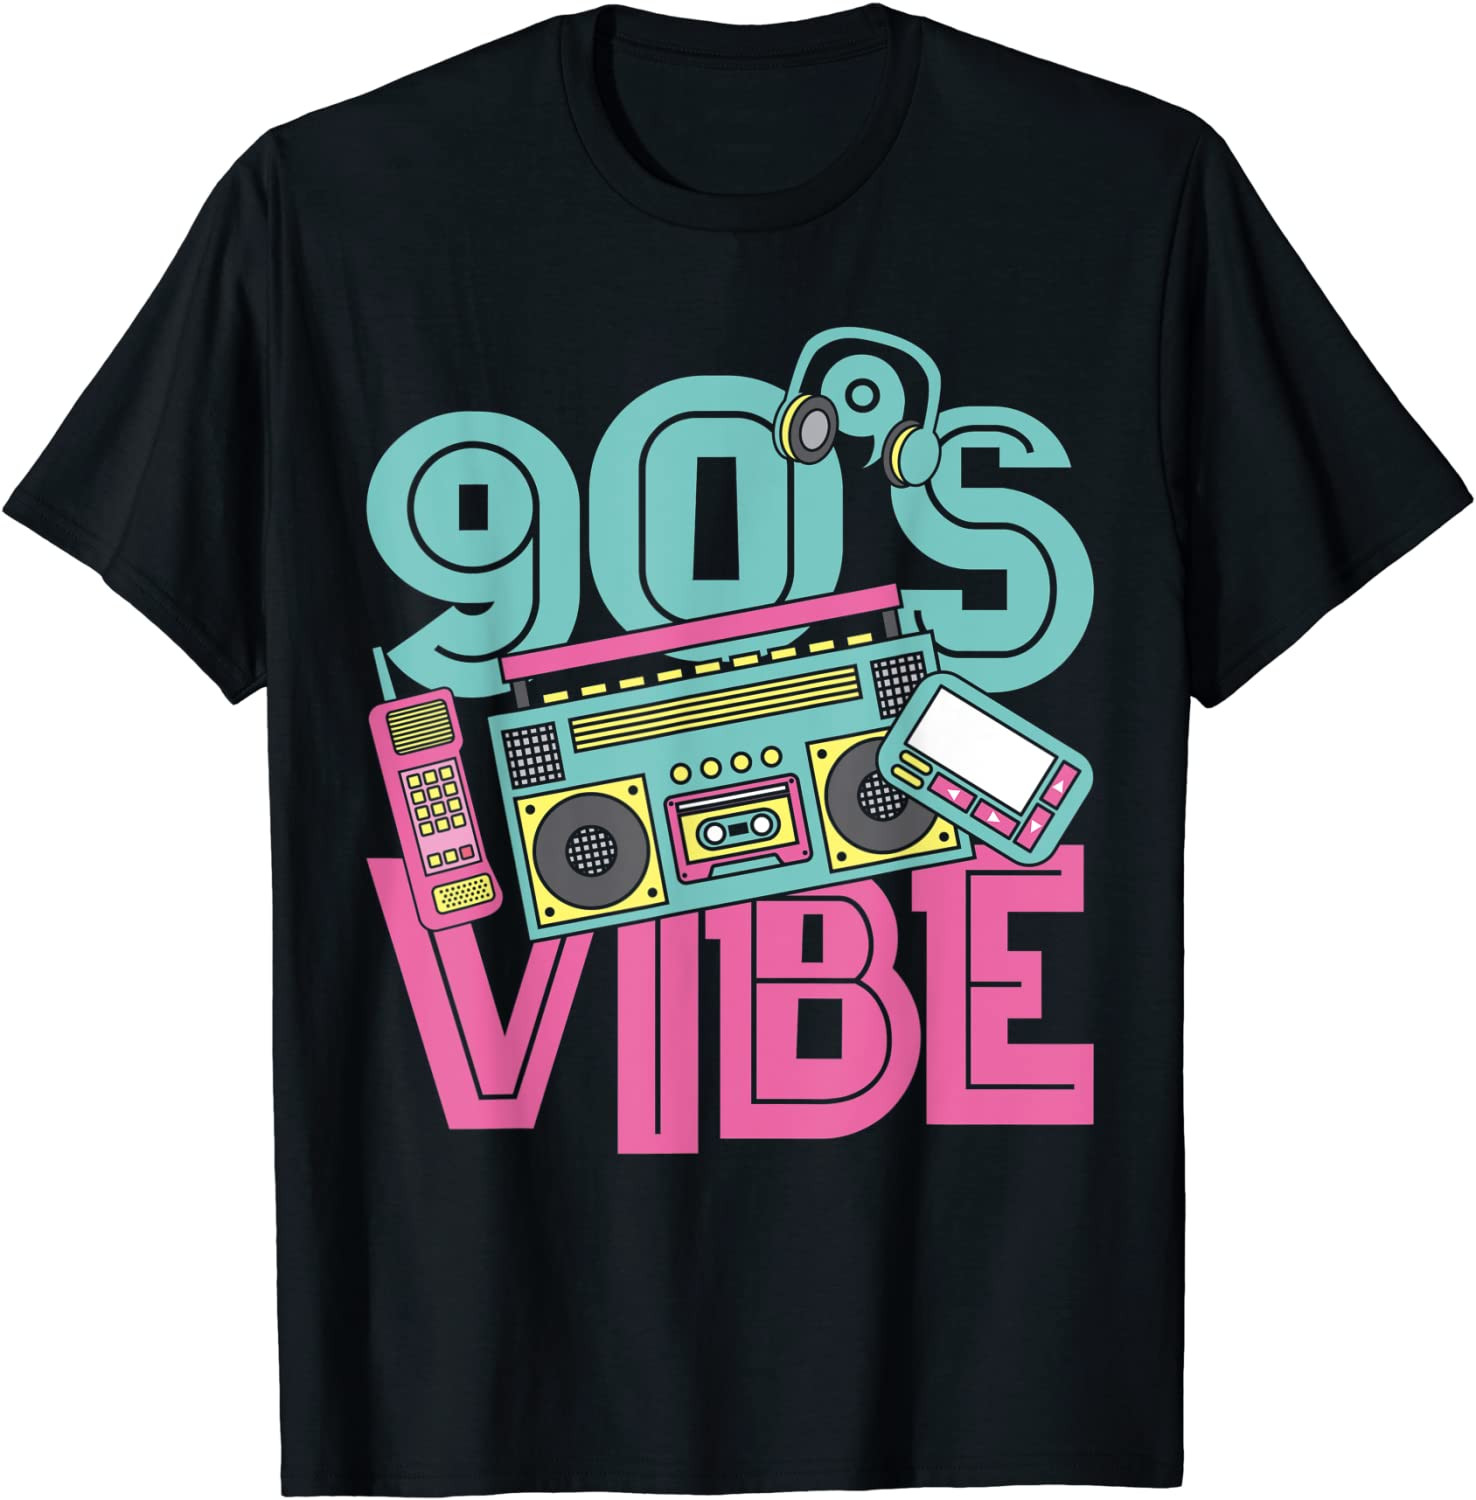 90s Vibe Vintage 1990s Music 90s Costume Party Nineties